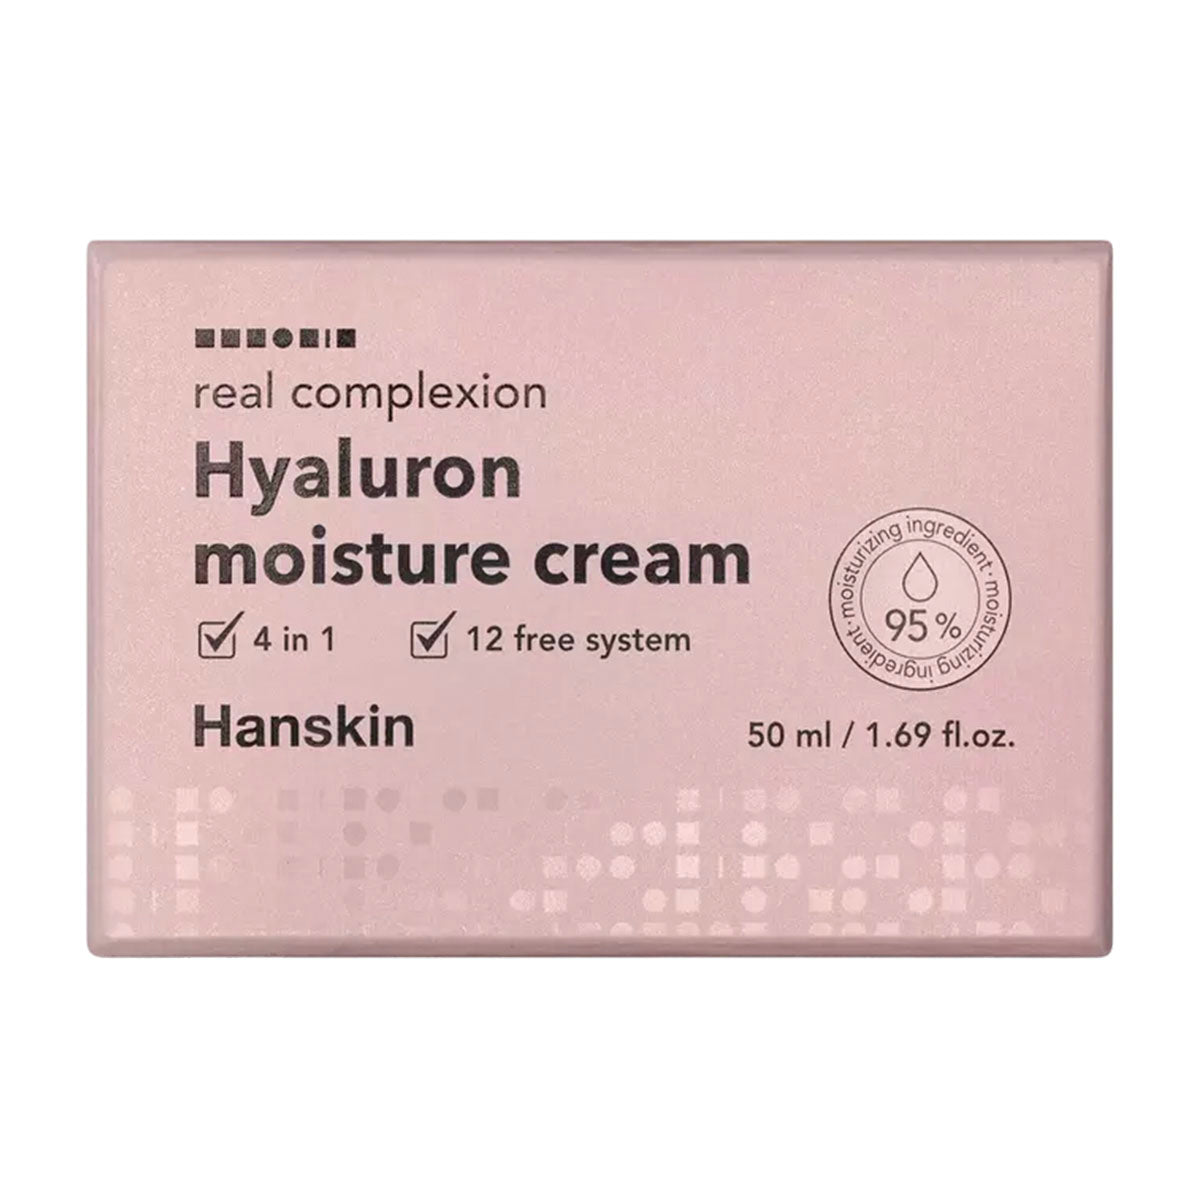 Real Complexion Hyaluron Moisture Cream package image